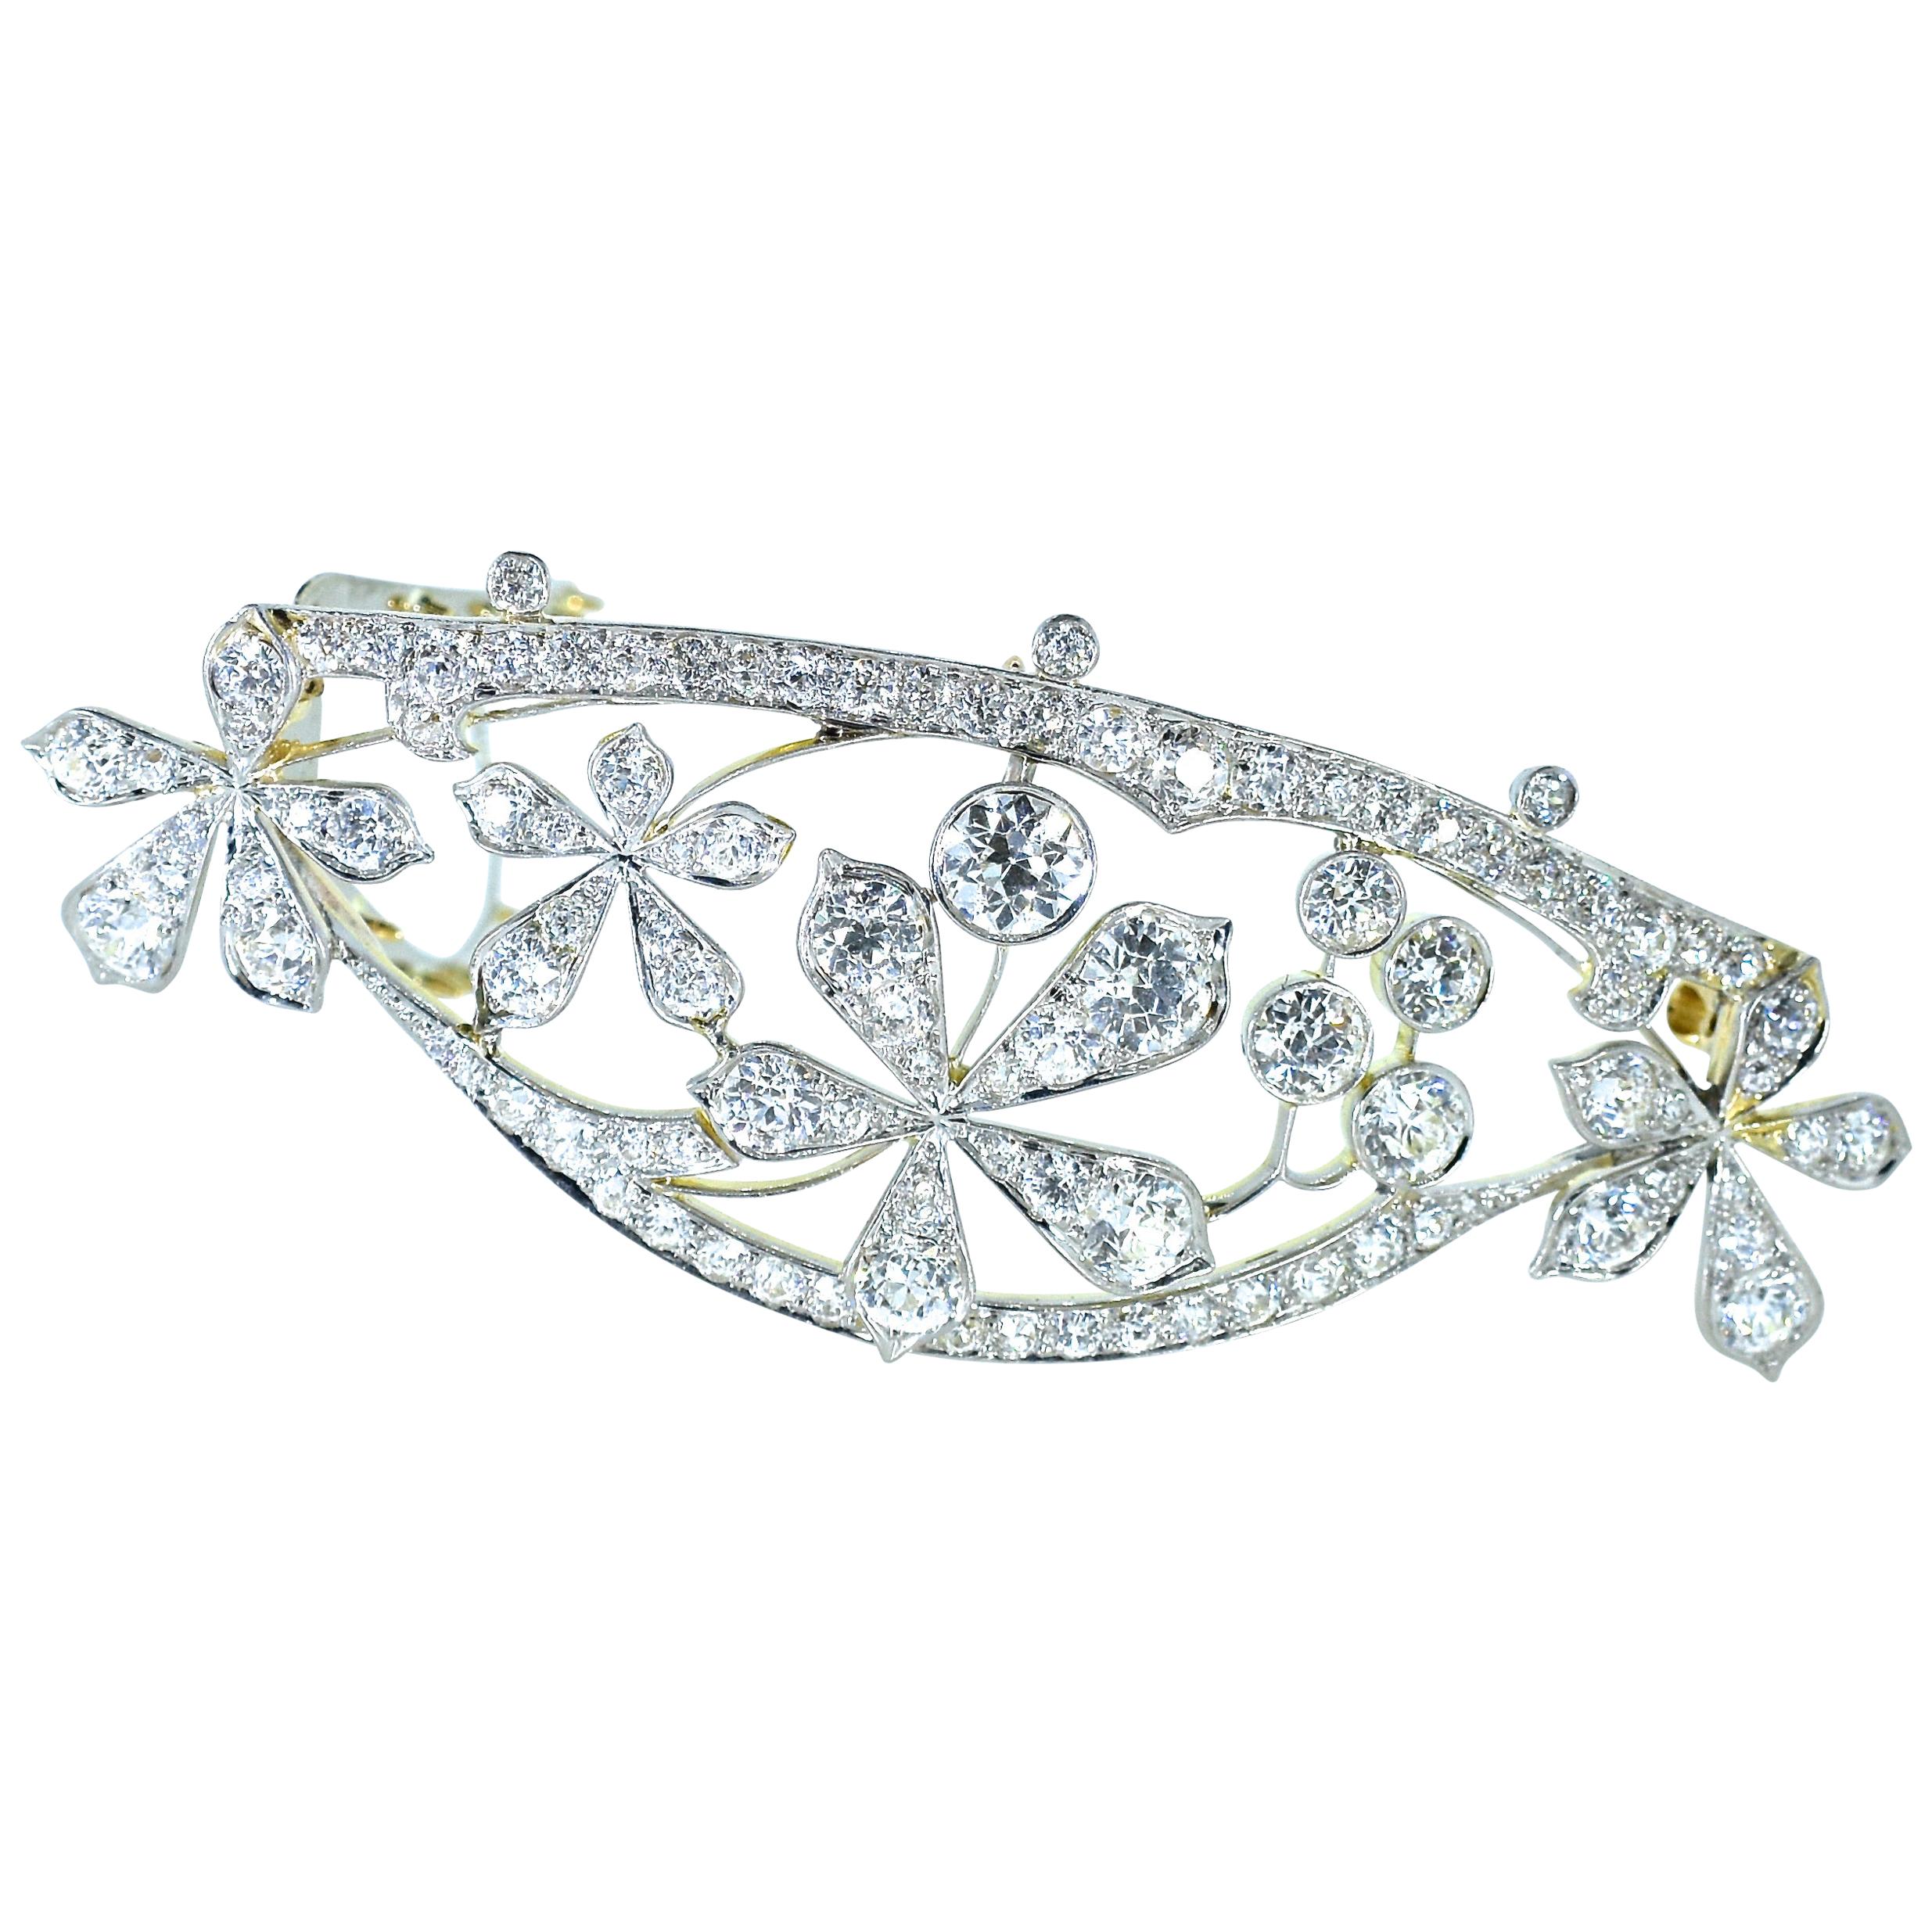 Antique barrette in platinum and backed in 18K yellow gold, with 100 fine white old cut diamonds amounting to approximately 6.95 cts.  The diamonds are all well cut and well matched, near colorless (H) and very slightly included, (VS).  This well